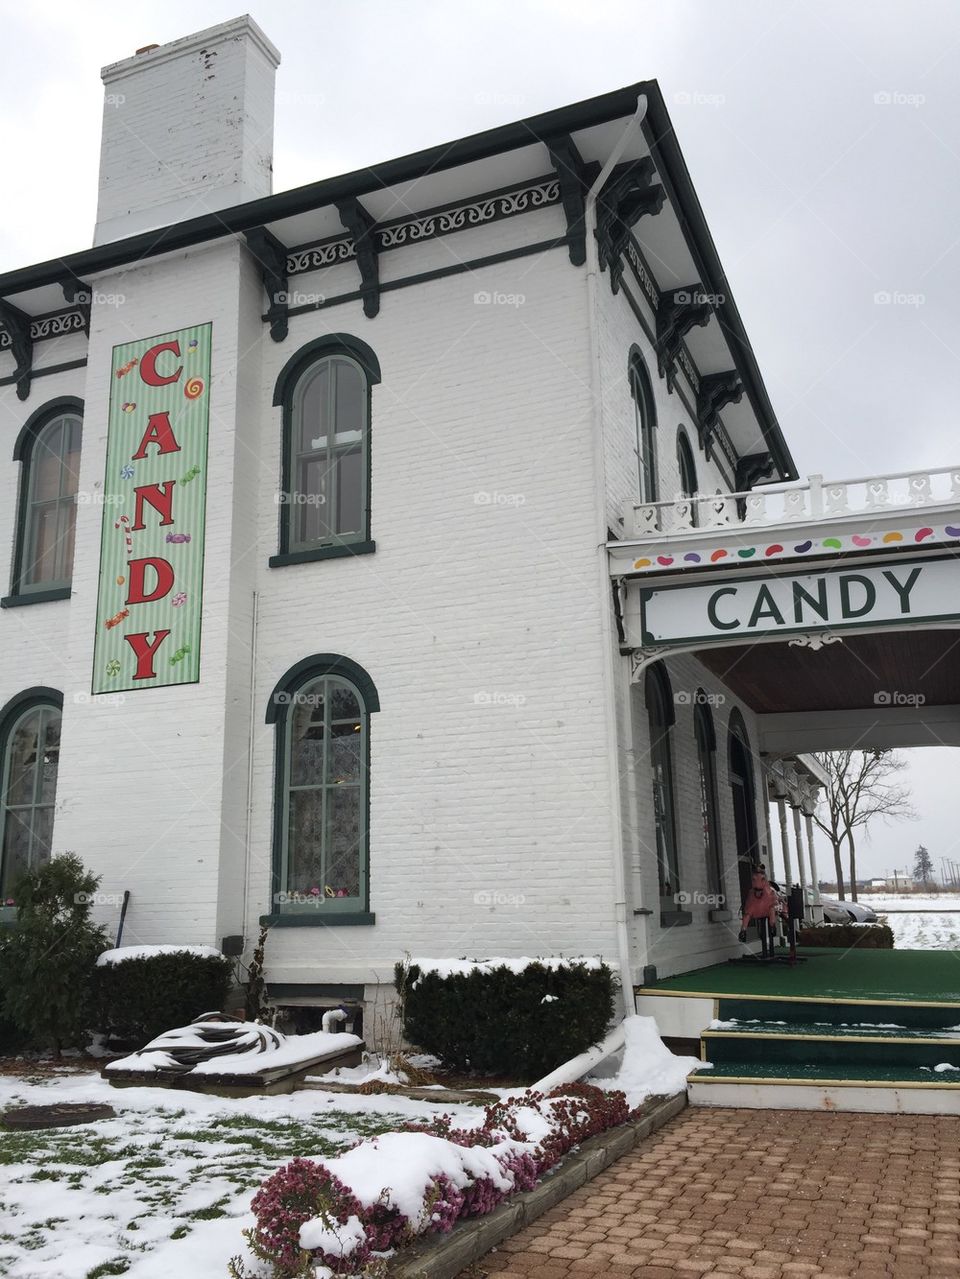 Wintry Candy Land